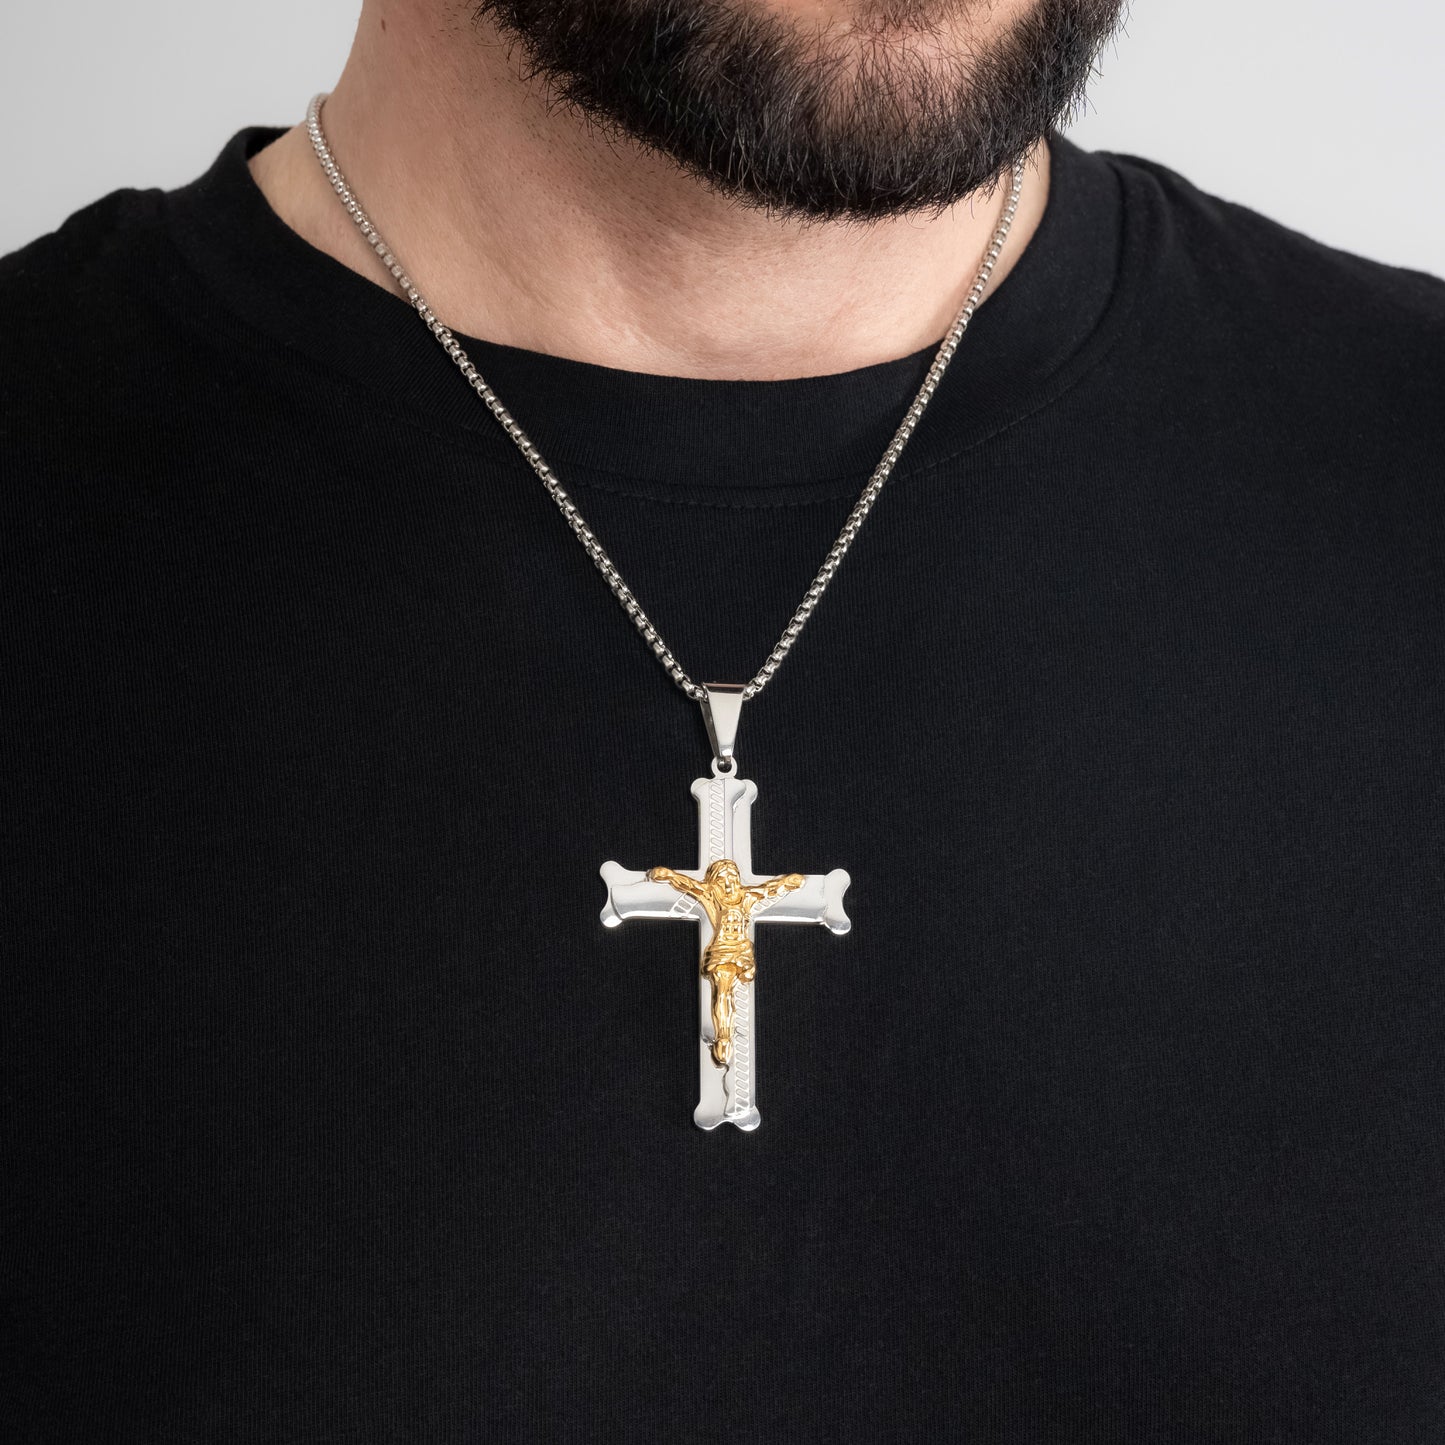 A male model in a black t-shirt wearing a Bliss Crucifix Cross Pendant with a 3mm Round Box Link Silver chain 22 inches.